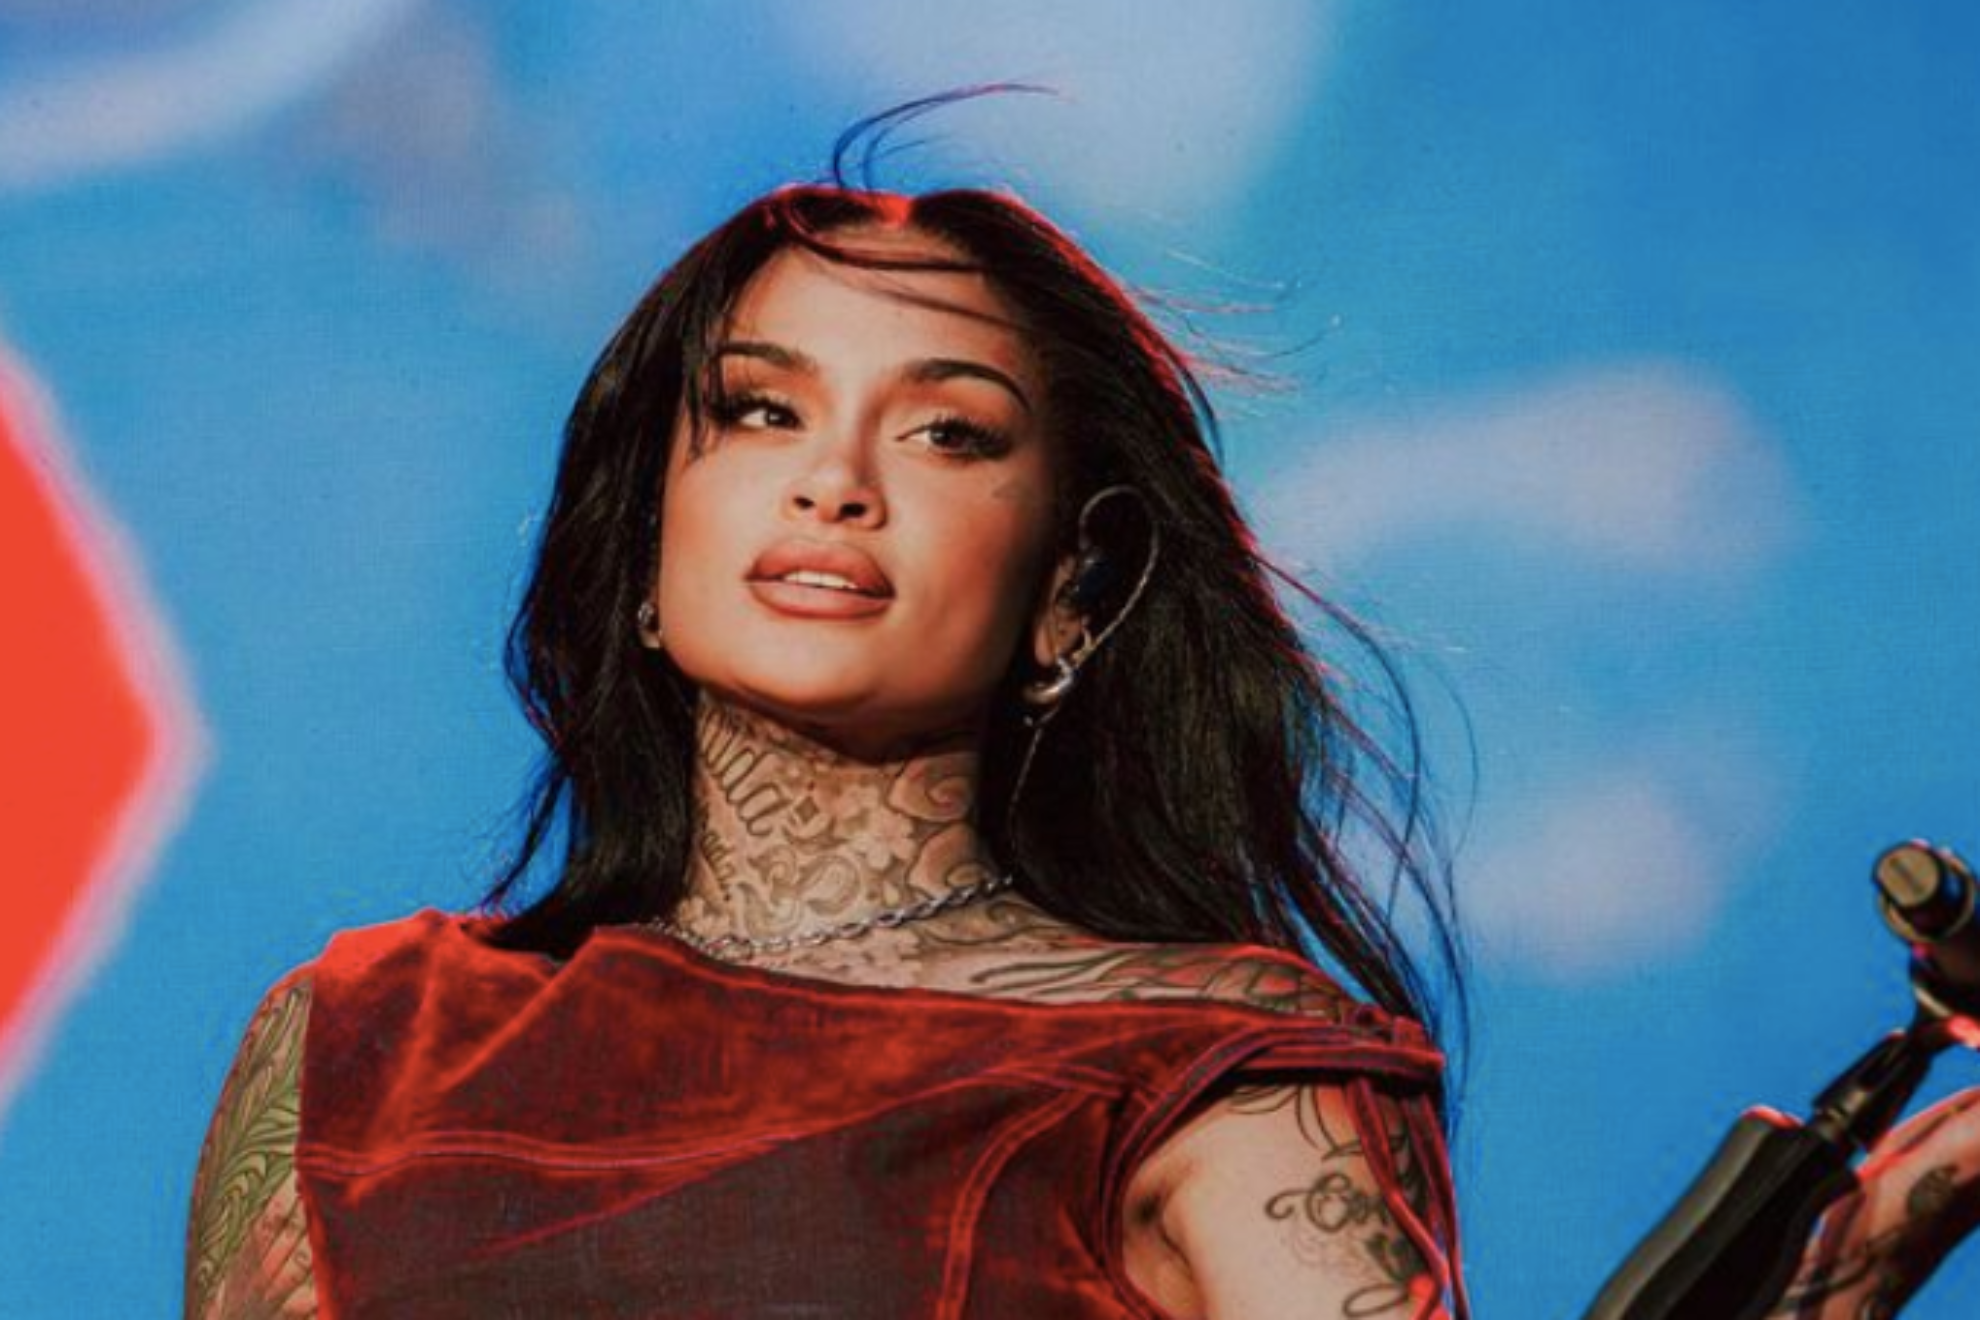 Kyrie Irvings ex-girlfriend Singer Kehlani expresses support for Palestine: What the f*** is wrong with yall?